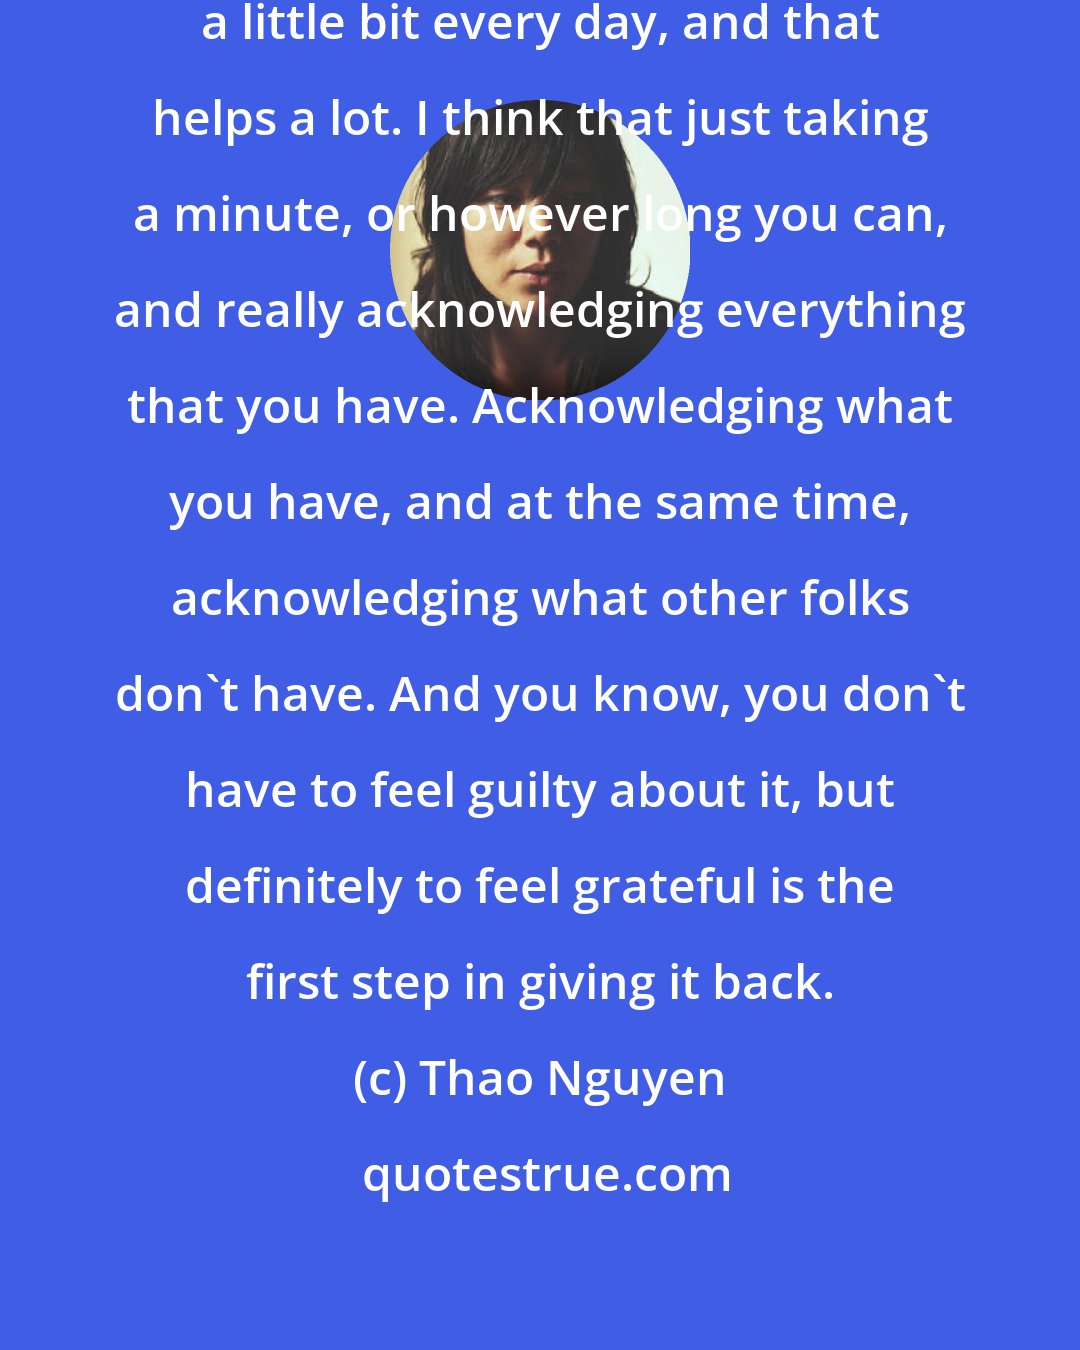 Thao Nguyen: So when I can, I try my best to meditate a little bit every day, and that helps a lot. I think that just taking a minute, or however long you can, and really acknowledging everything that you have. Acknowledging what you have, and at the same time, acknowledging what other folks don't have. And you know, you don't have to feel guilty about it, but definitely to feel grateful is the first step in giving it back.